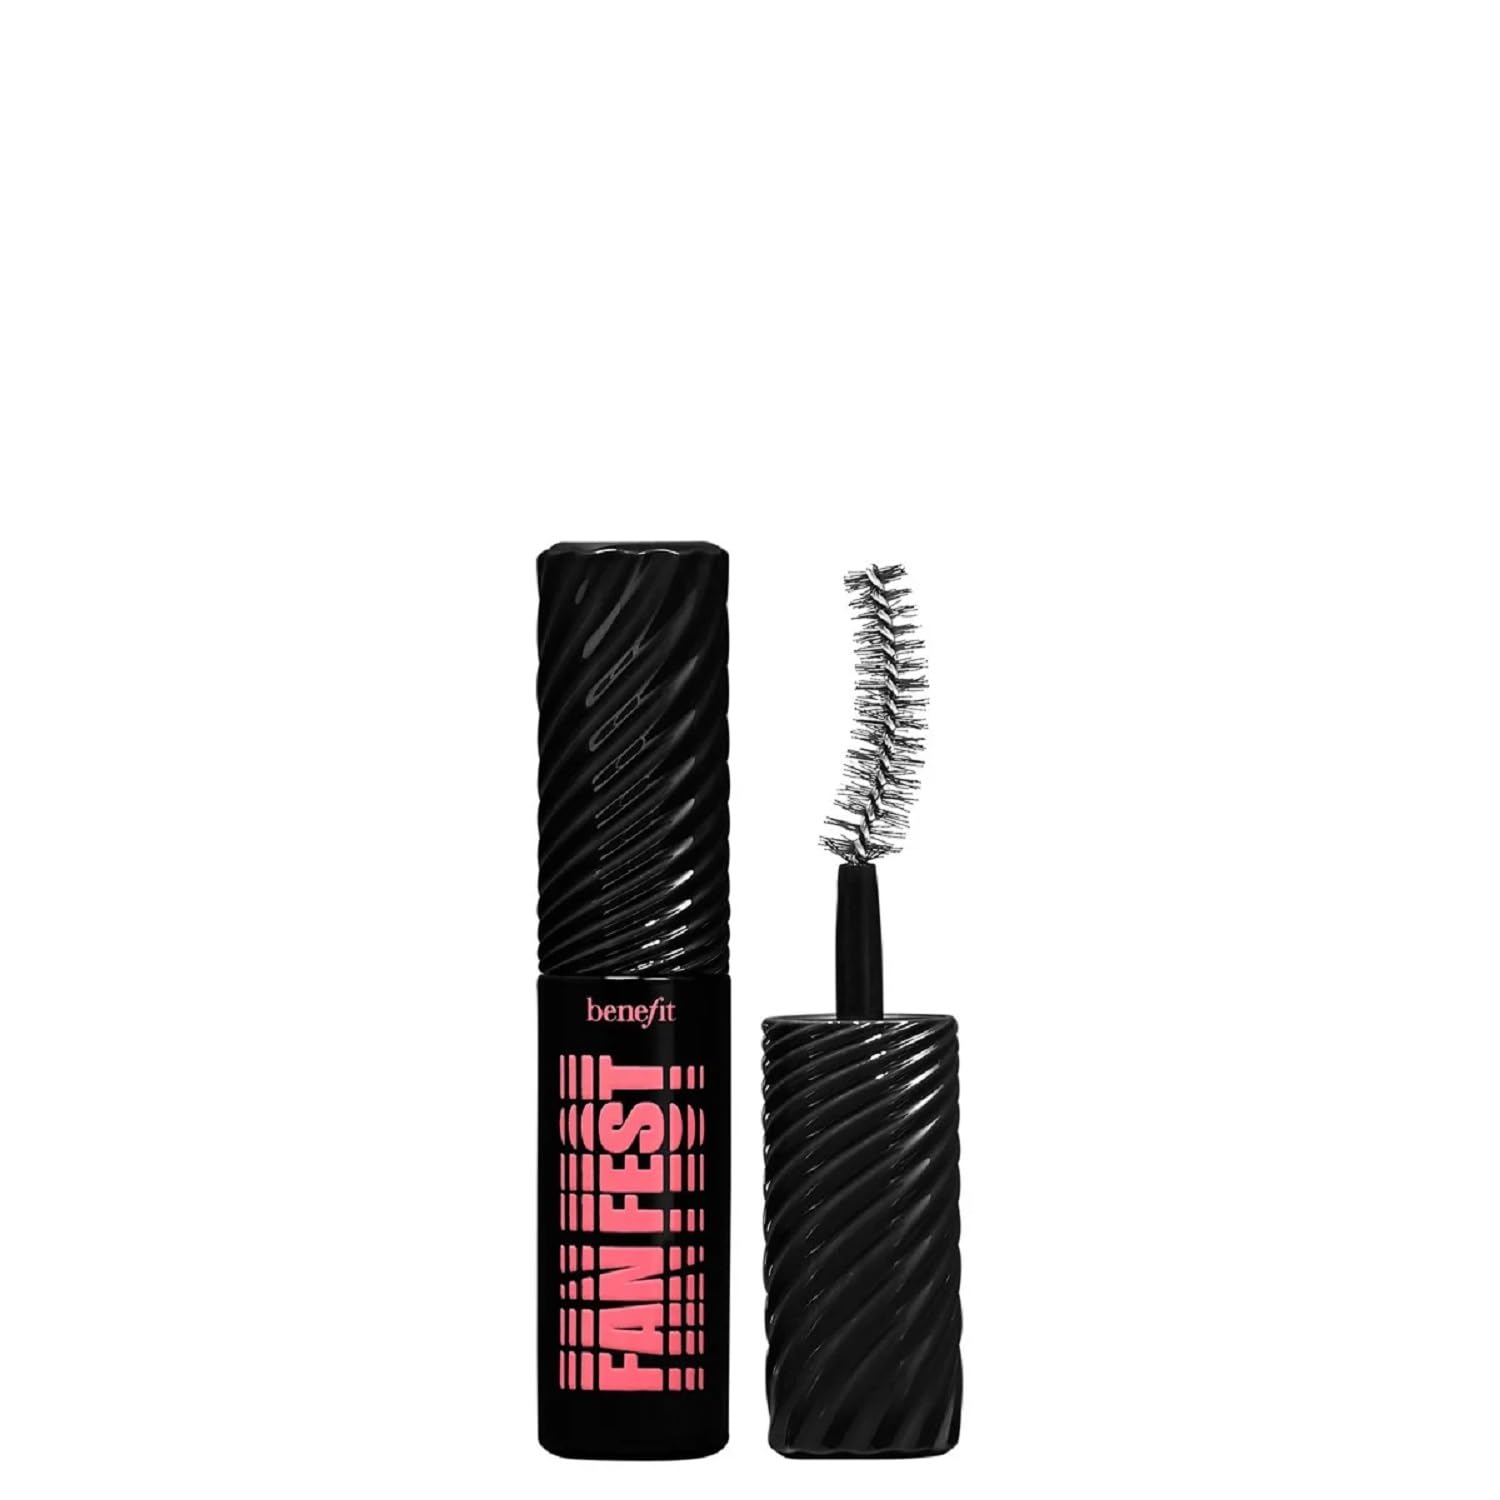 Benefit Cosmetics Mascara 3 Piece Full Size Set $72 Value They're Real Bad  Girl Bang Roller Lash Set Together At Last